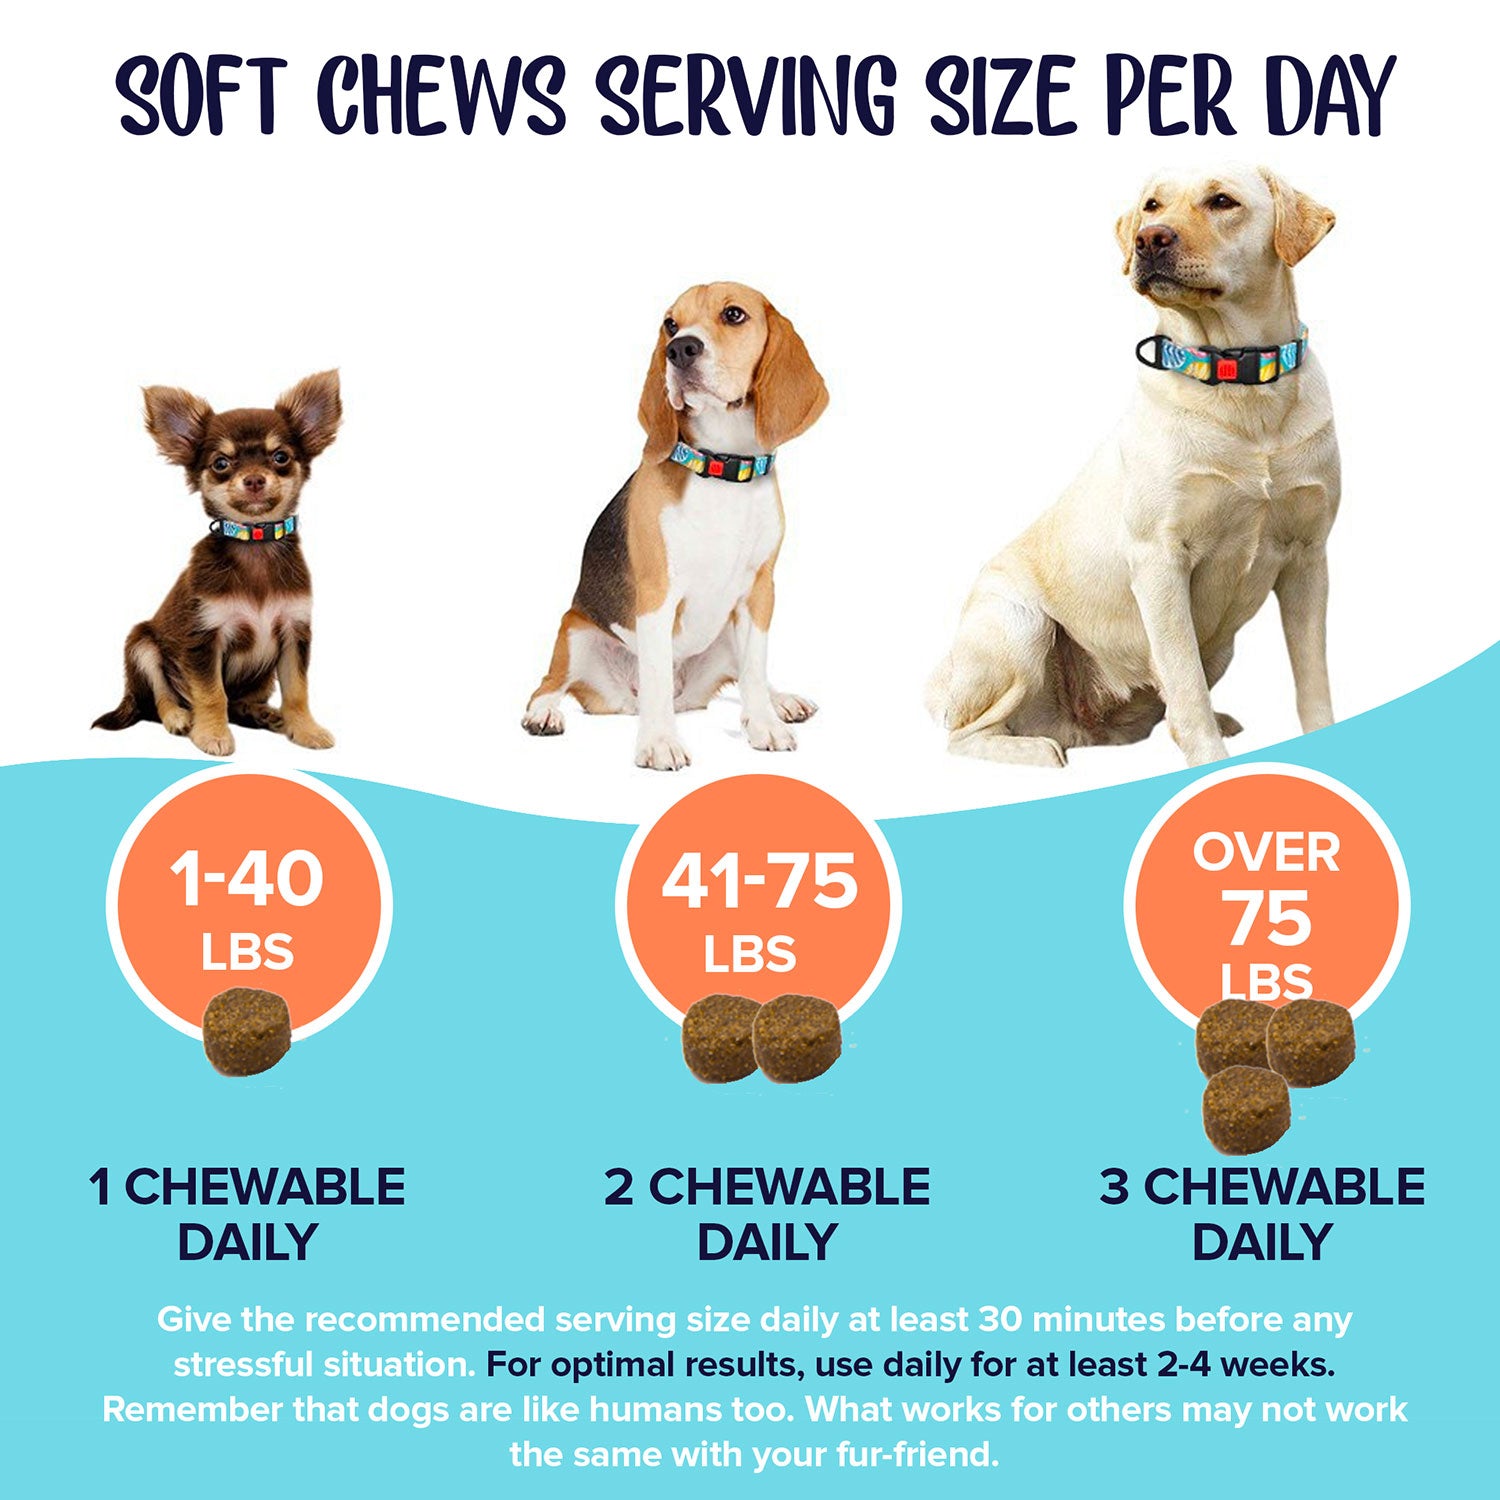 Serving size per day